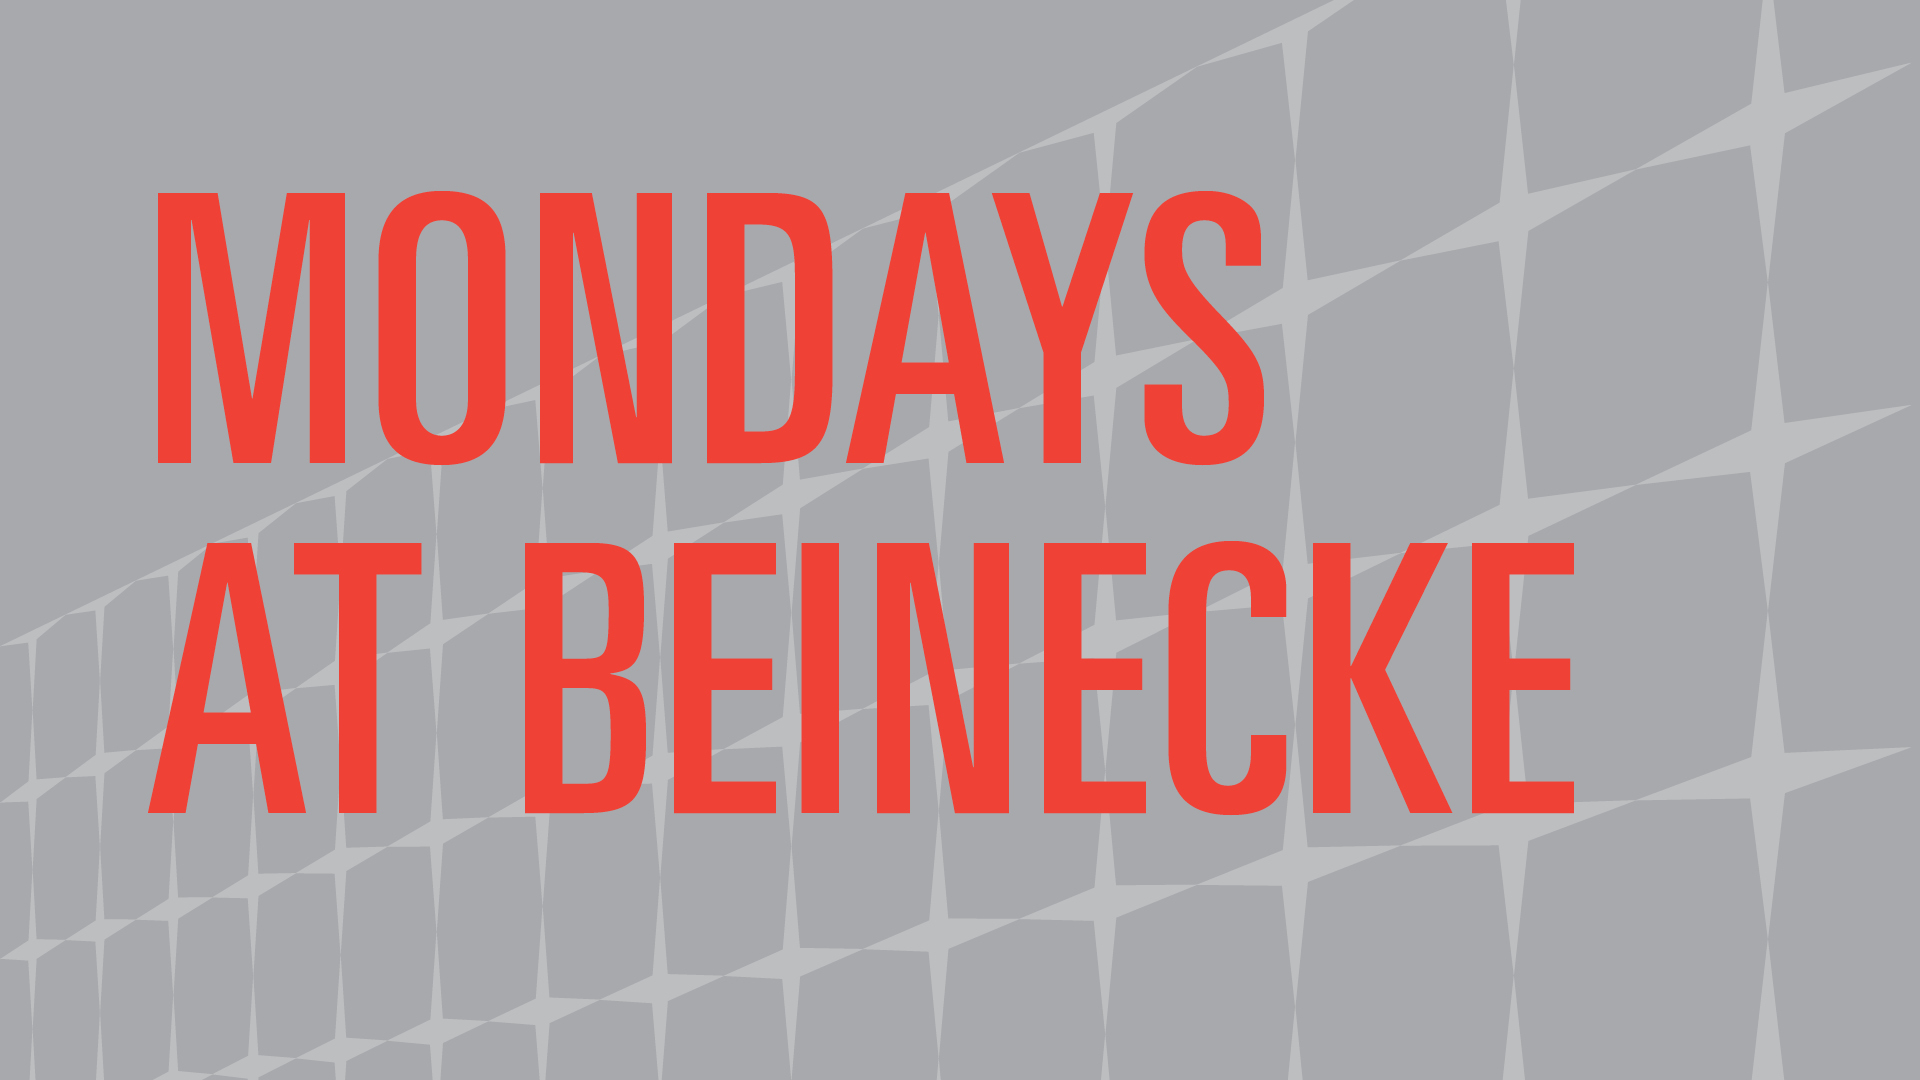 Mondays at Beinecke in bold red letters on a grey background